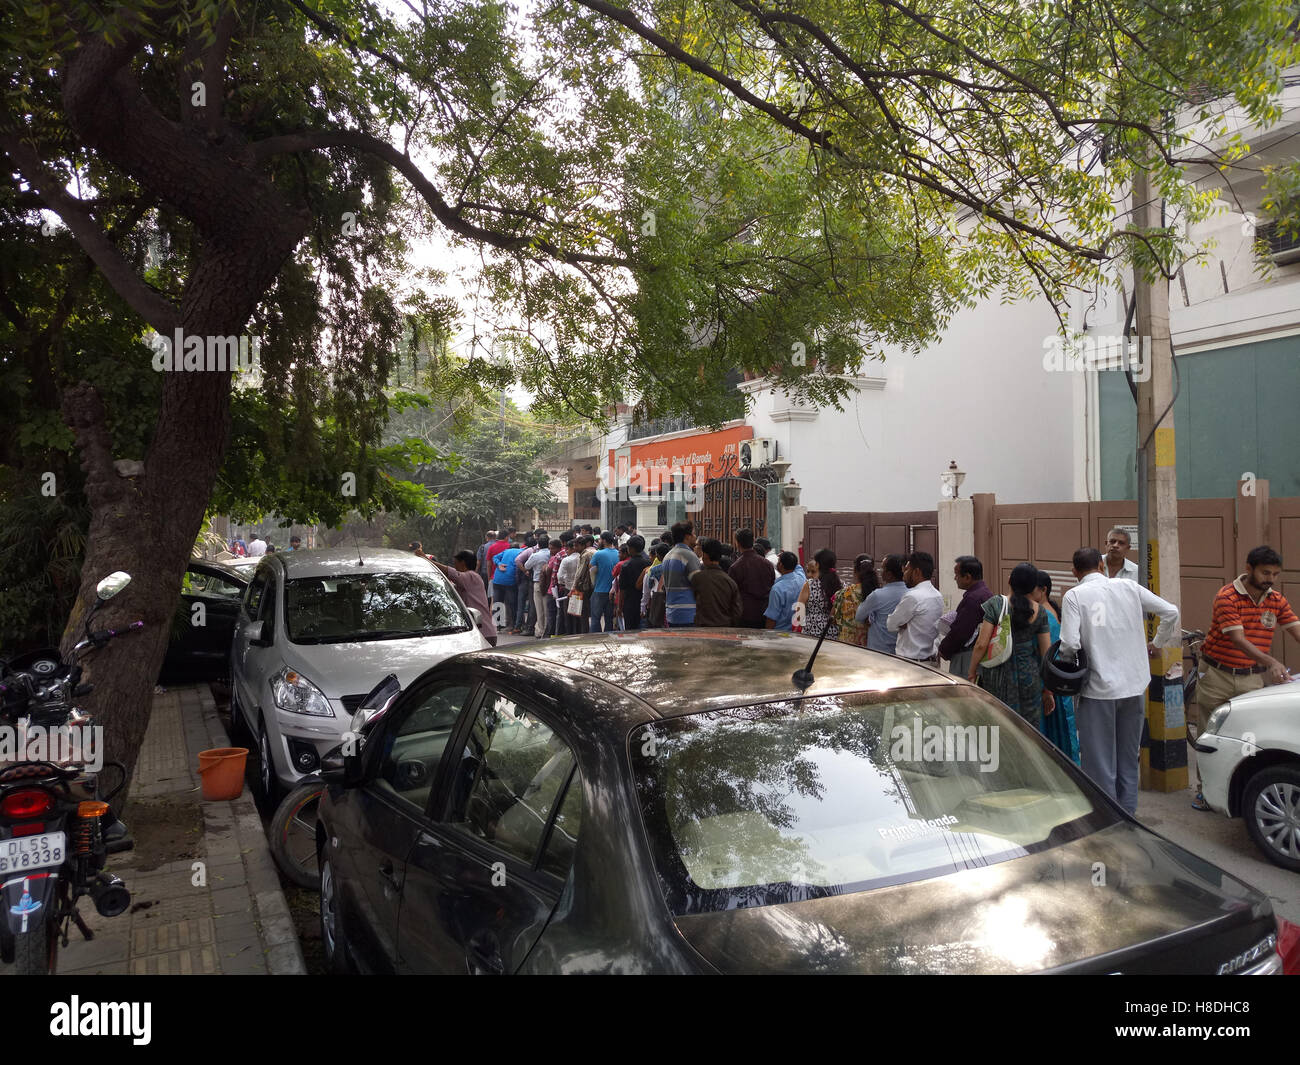 Delhi, India. 11th Nov, 2016. Queue of people waiting to deposit high value notes in their accounts or get them exchanged for smaller notes outside banks in Delhi after the Indian Government announced demonetisation of Rs. 500 and Rs. 1000 notes in Delhi, India  Credit:  Ashish Agarwal/Alamy Live News. Stock Photo